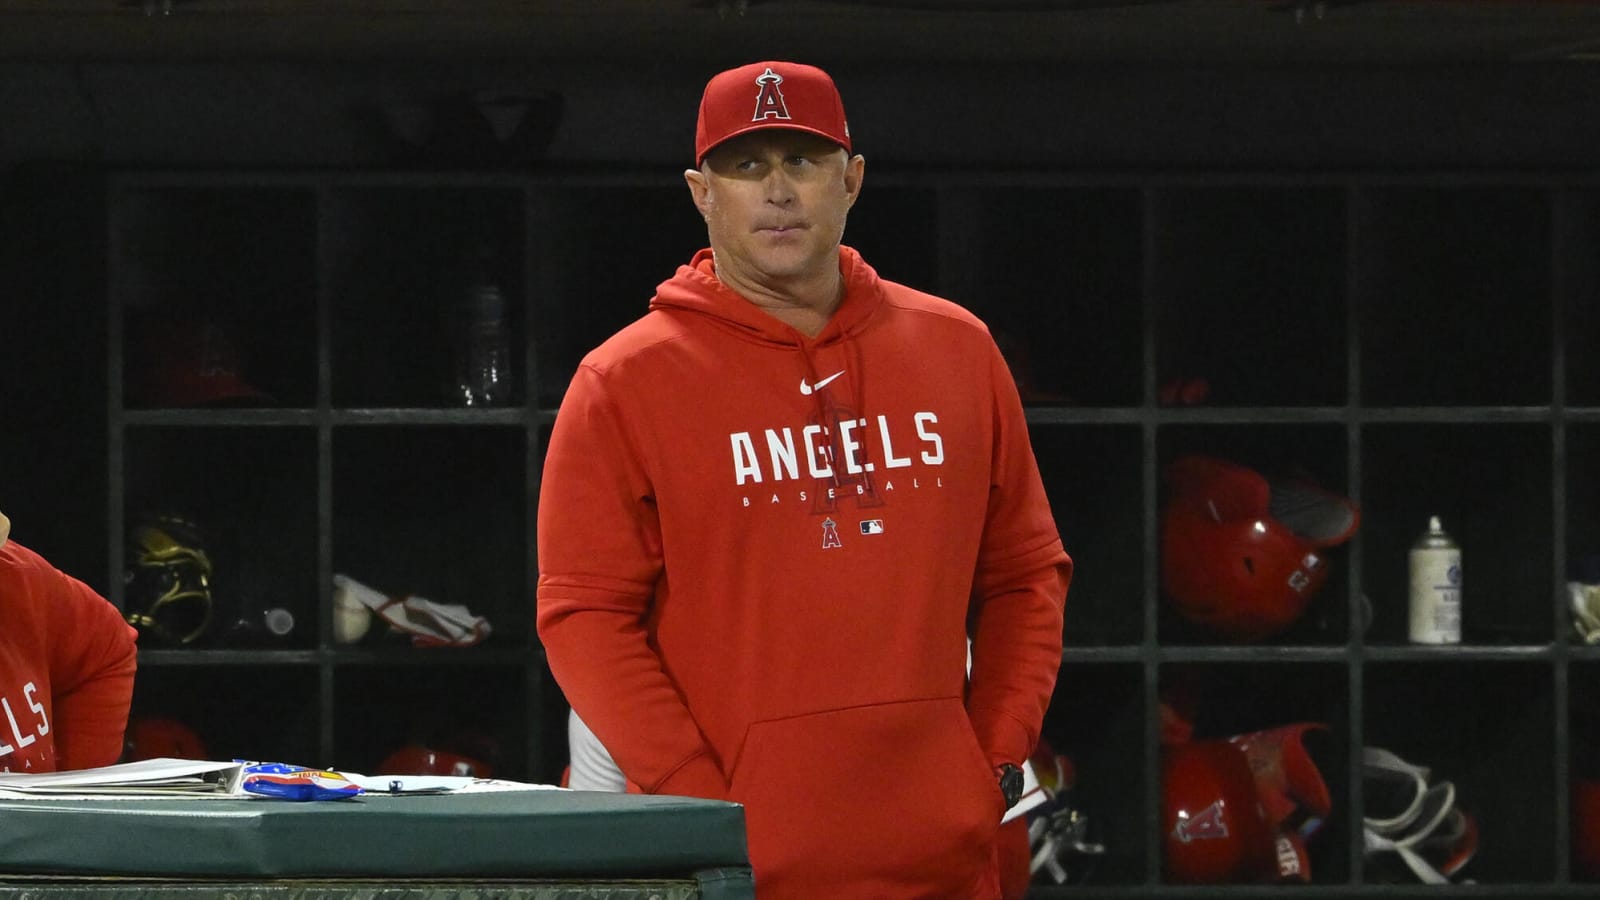 Angels ‘In A Good Place’ Despite Mixed April Performance